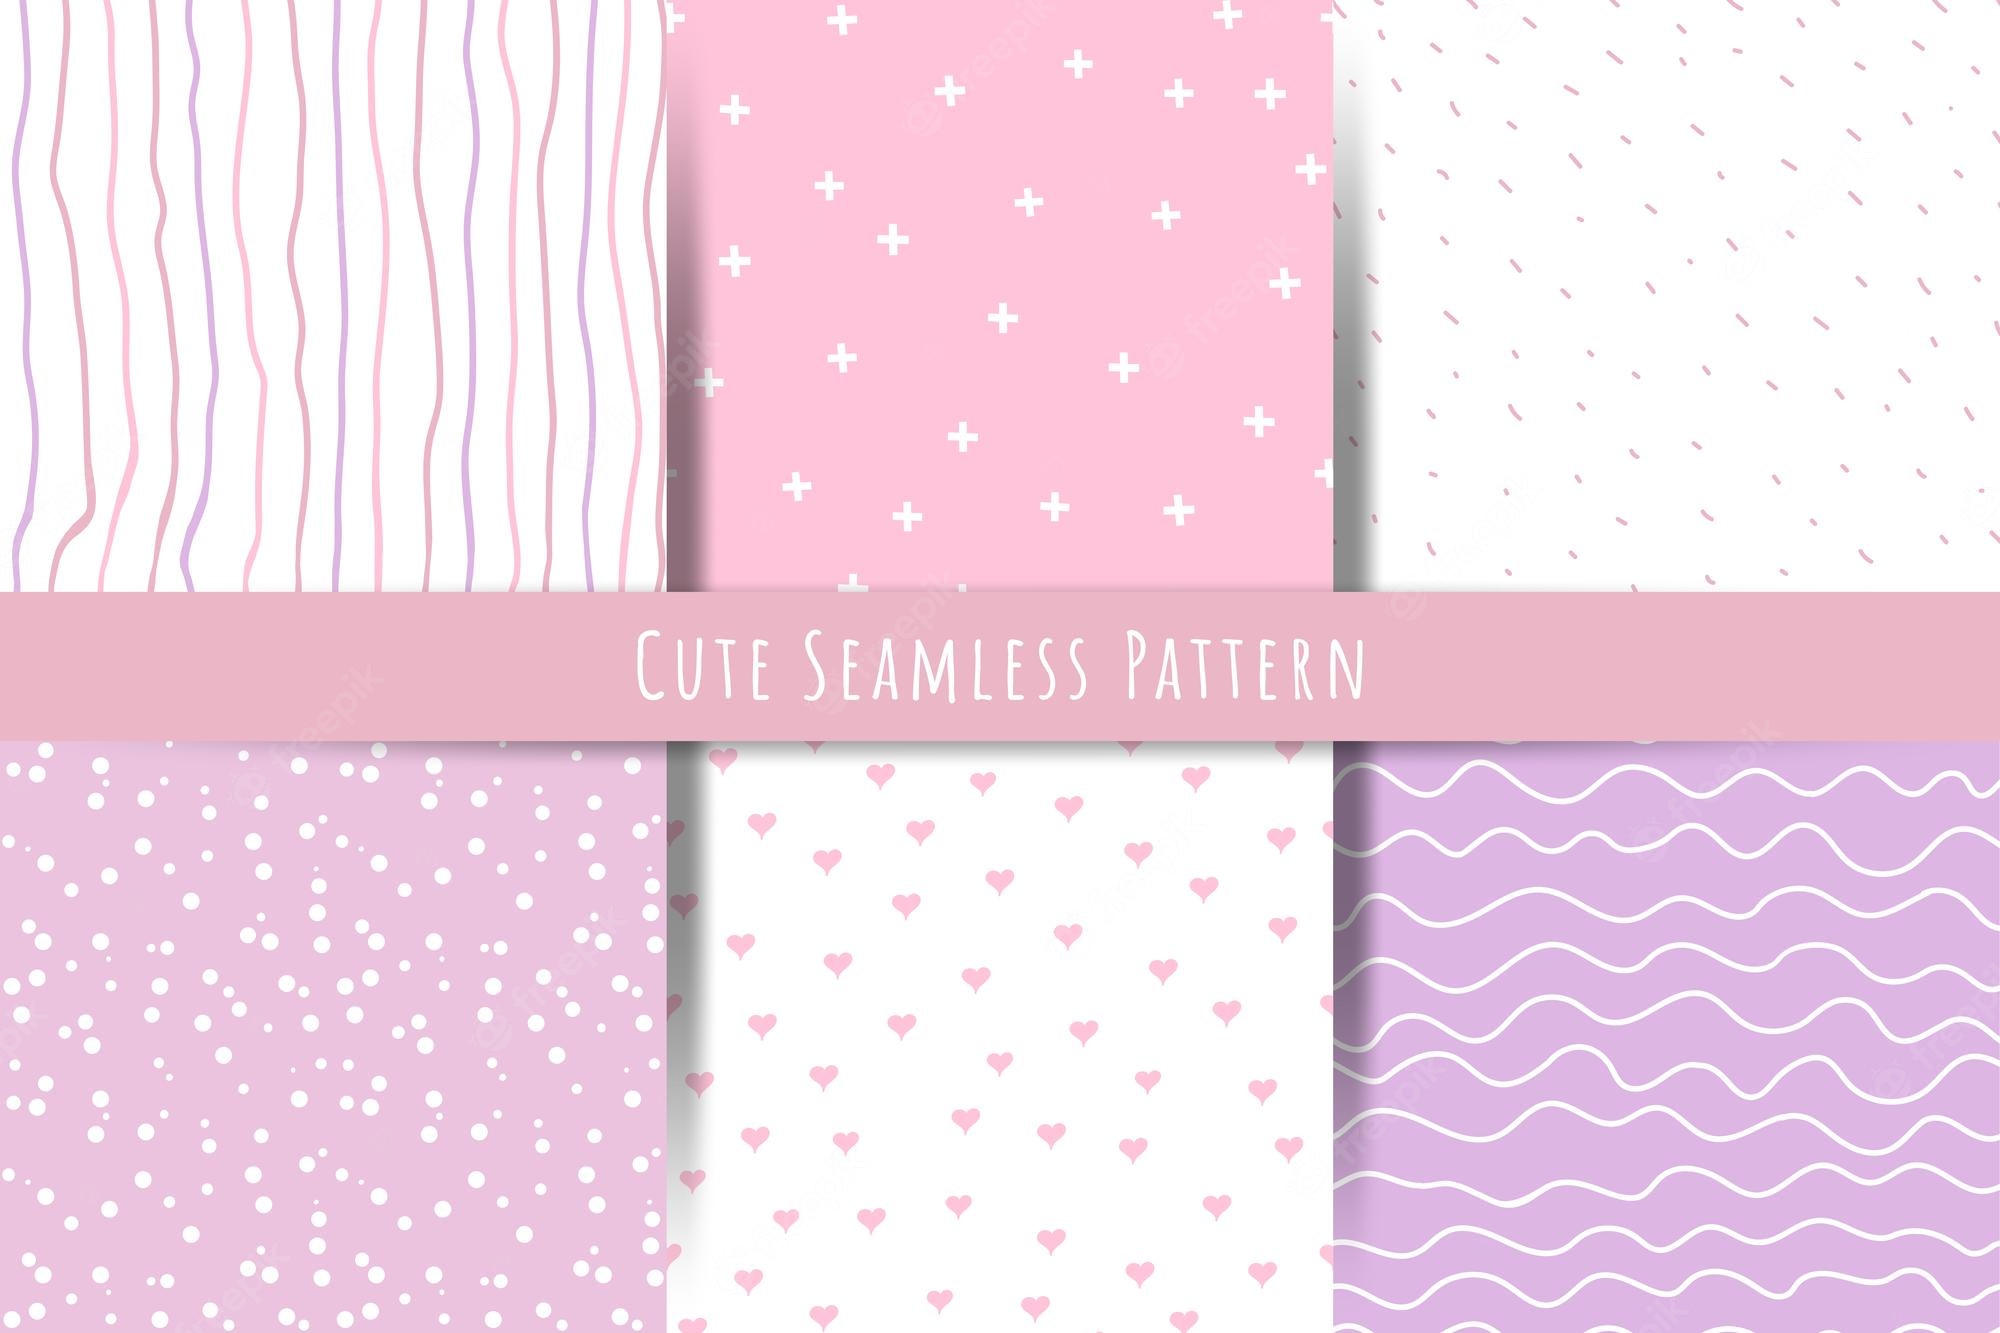 Simple Patterns Wallpapers